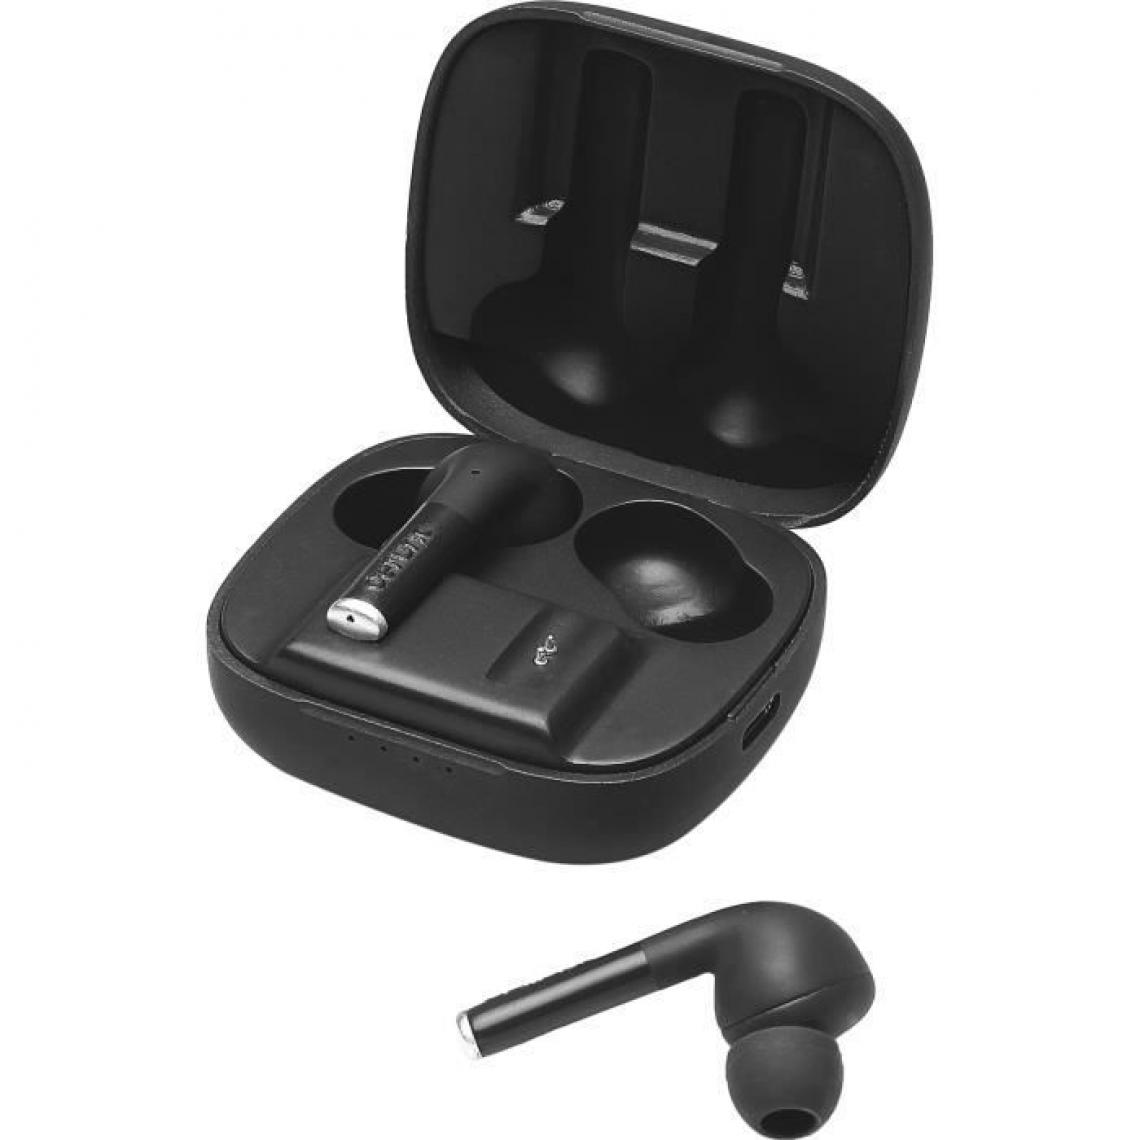 Defunc - DEFUNC D4241 TRUE GAMING - Ecouteur True Wireless gaming - Black - Ecouteurs intra-auriculaires